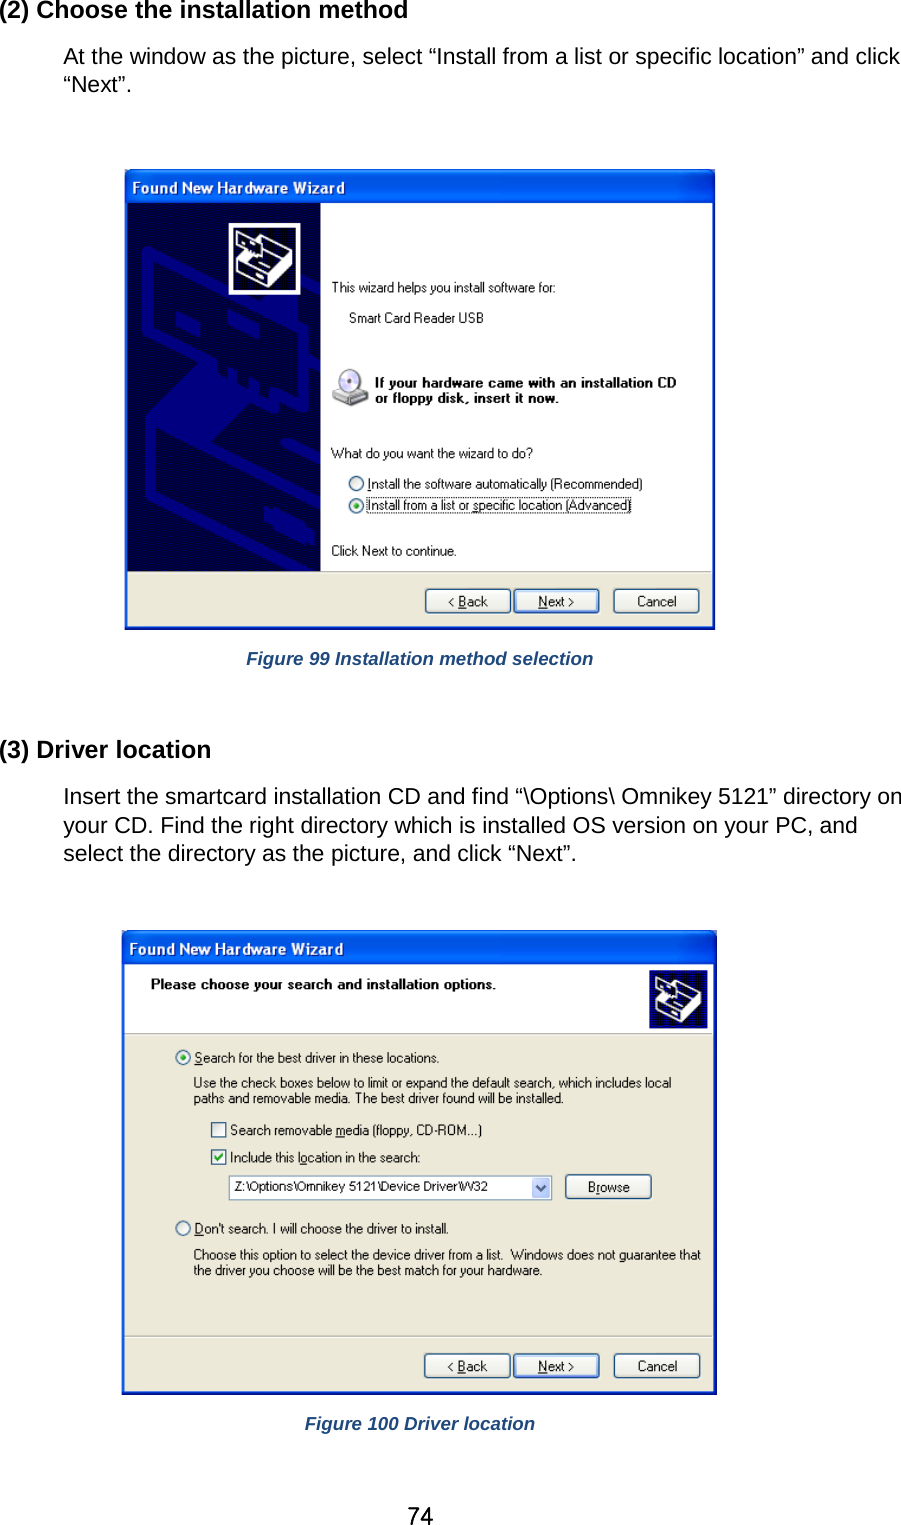 74 (2) Choose the installation method At the window as the picture, select “Install from a list or specific location” and click “Next”.   Figure 99 Installation method selection  (3) Driver location Insert the smartcard installation CD and find “\Options\ Omnikey 5121” directory on your CD. Find the right directory which is installed OS version on your PC, and select the directory as the picture, and click “Next”.   Figure 100 Driver location  